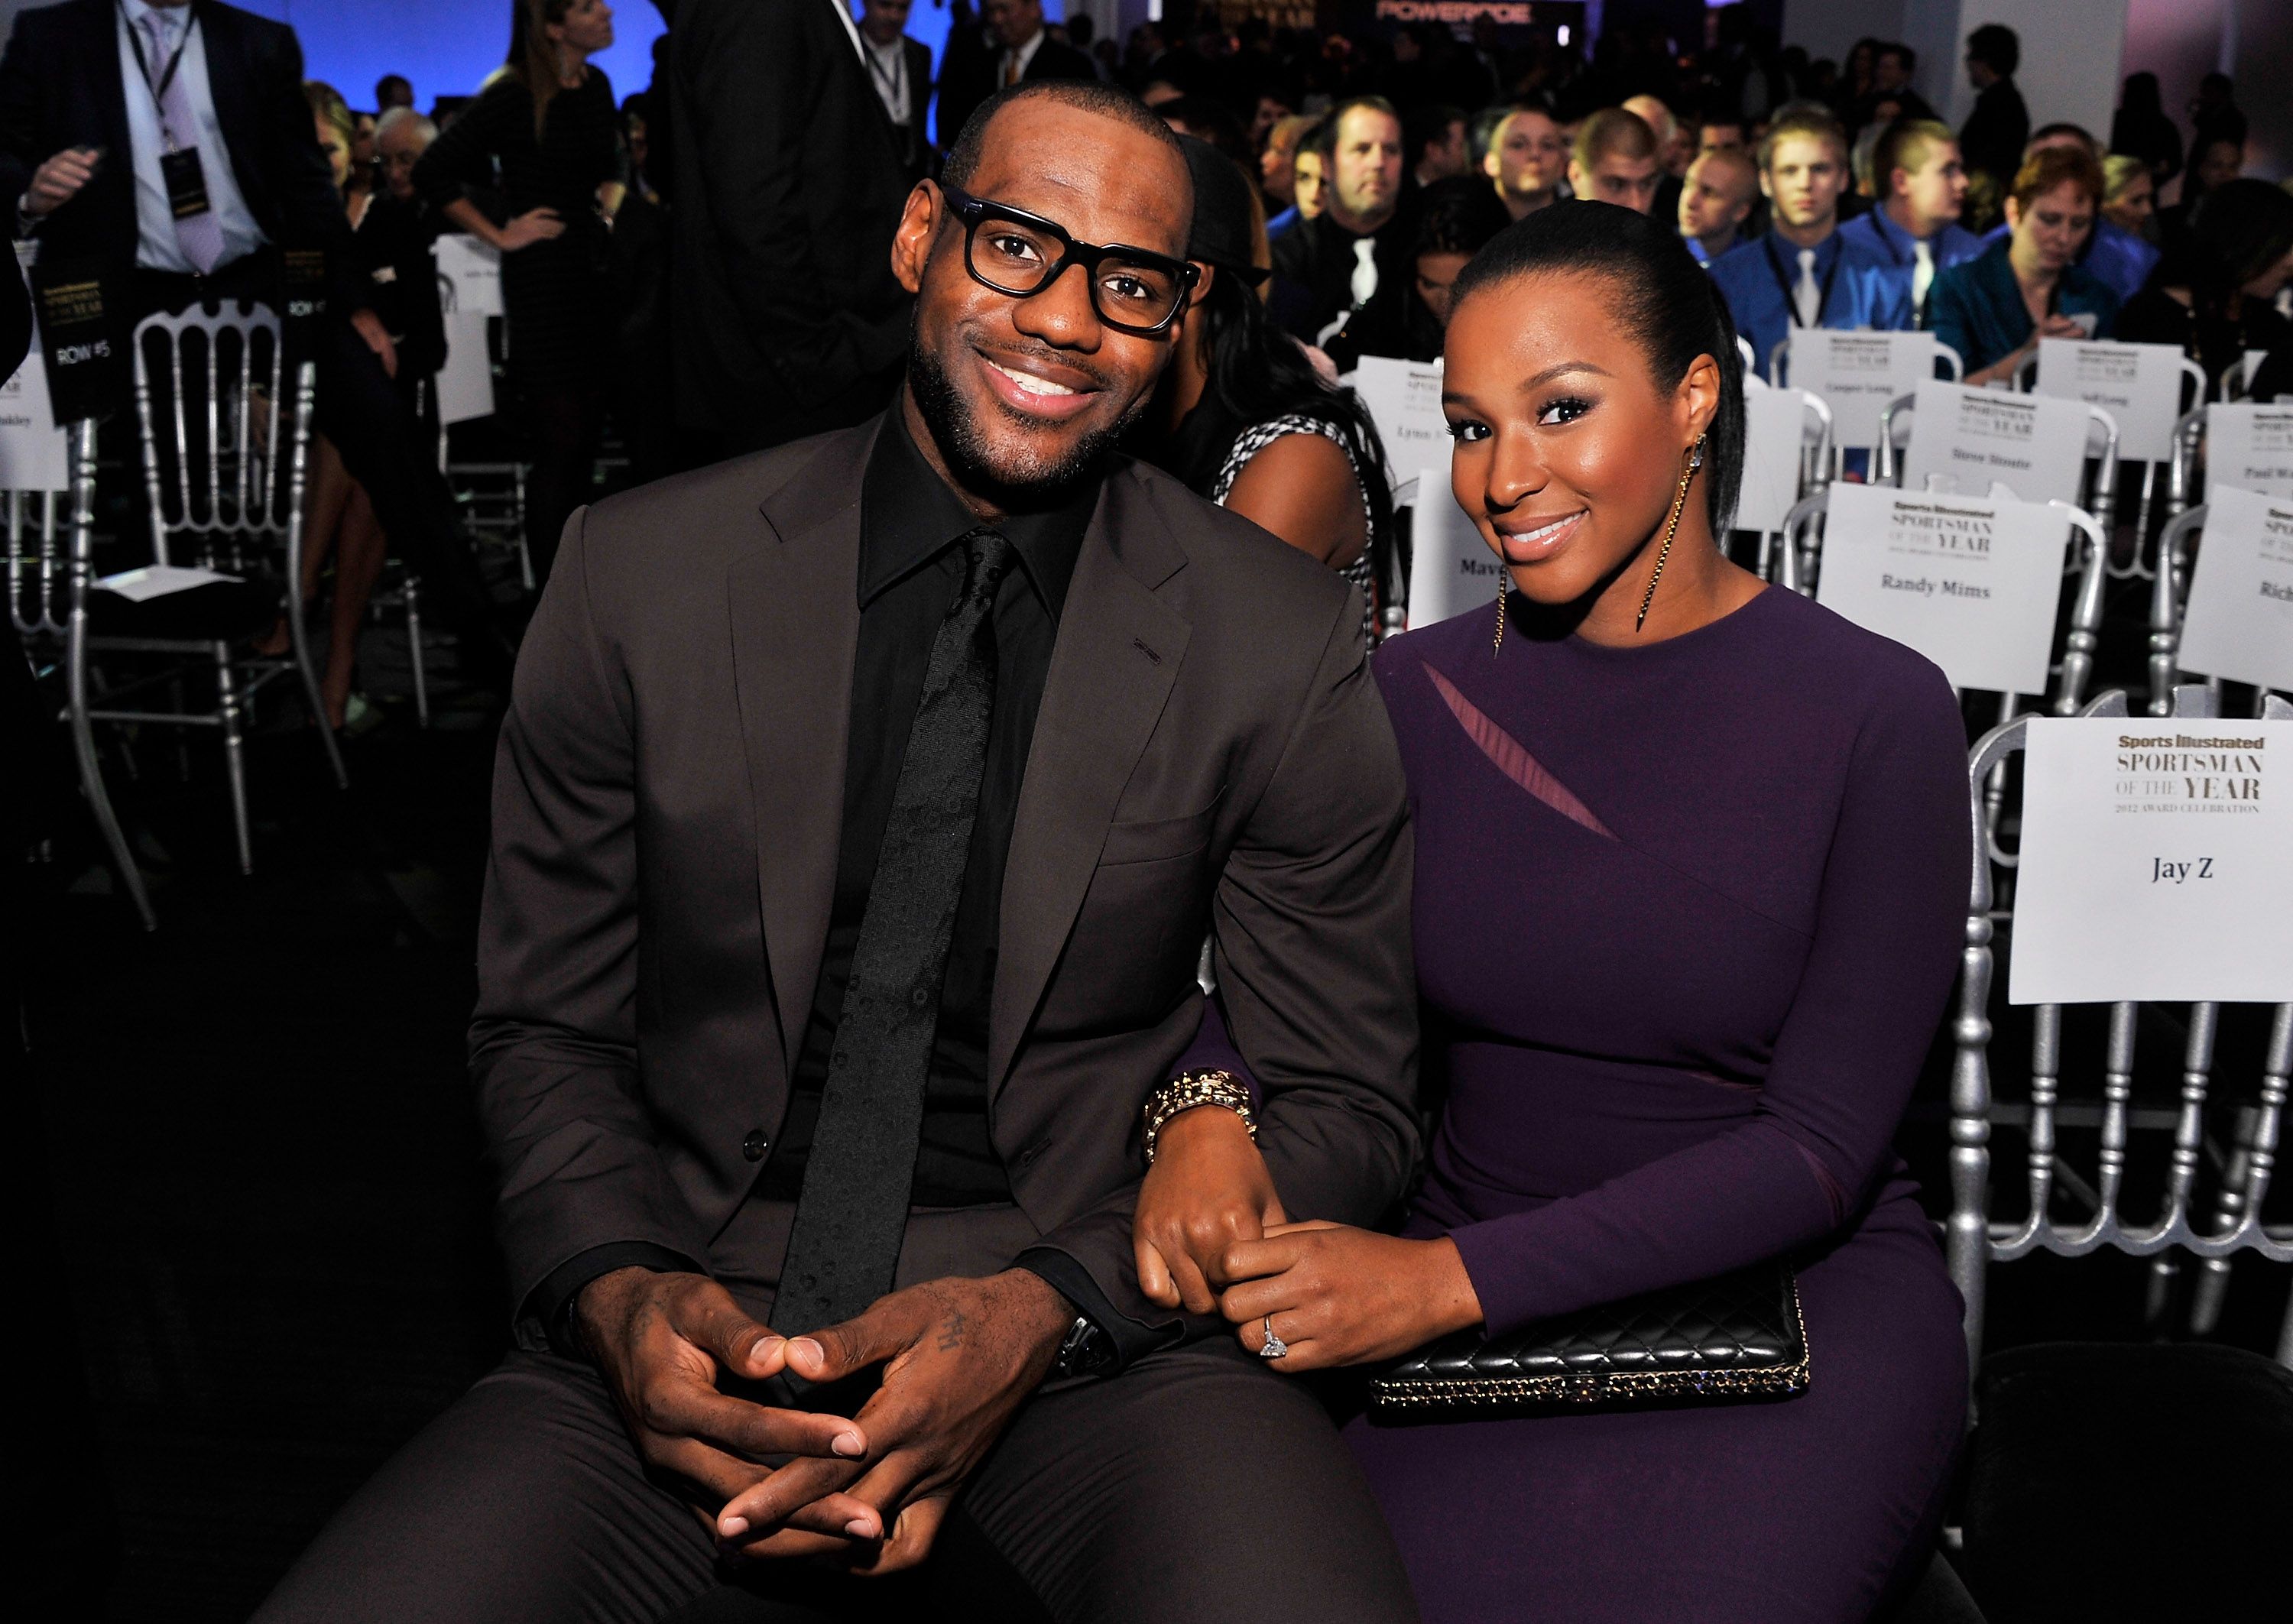 Legendary LeBron James and his wife, Savannah, are high school sweethearts